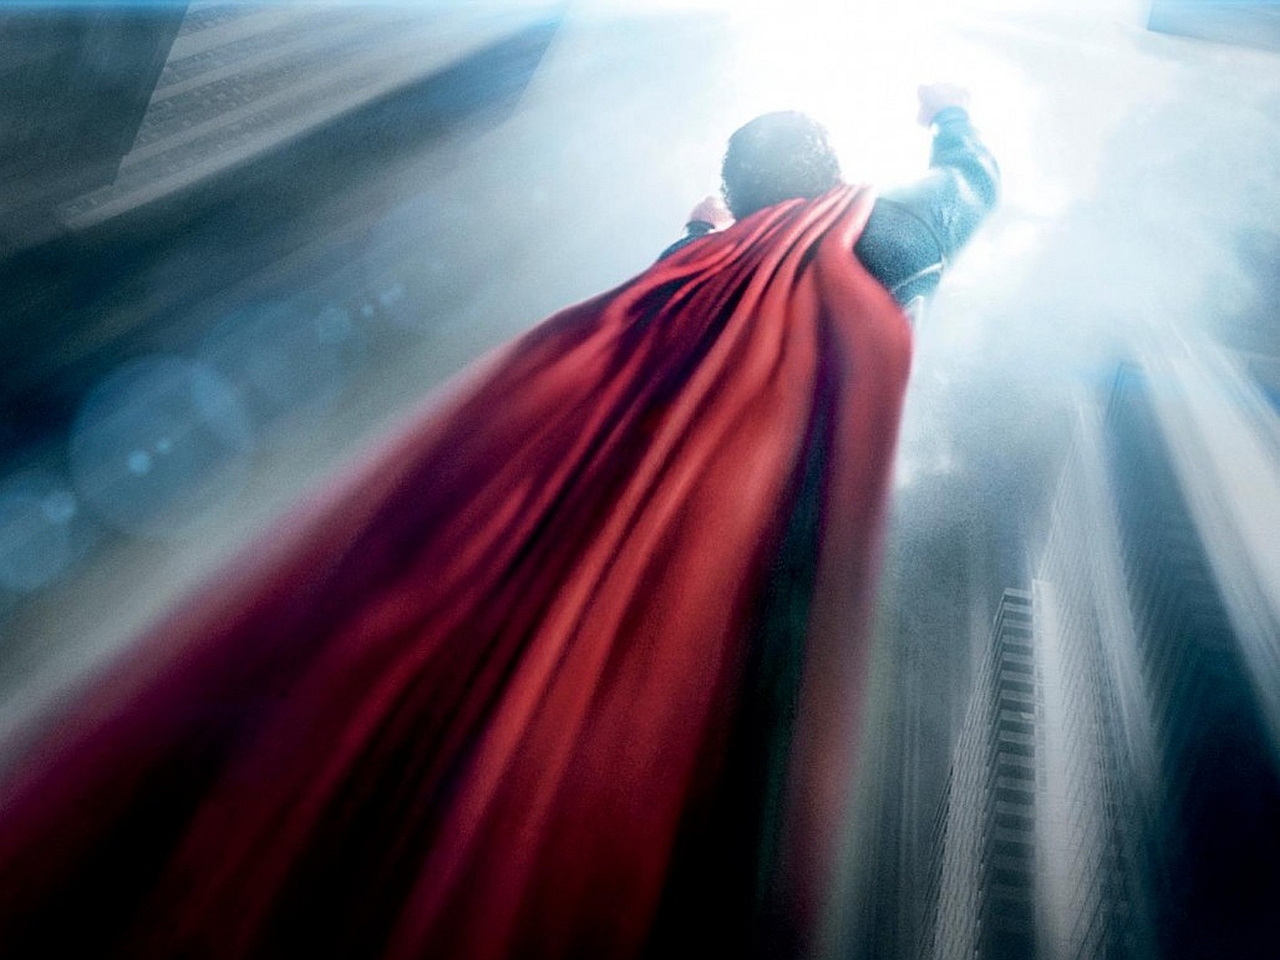 Download mobile wallpaper Man Of Steel, Movie for free.